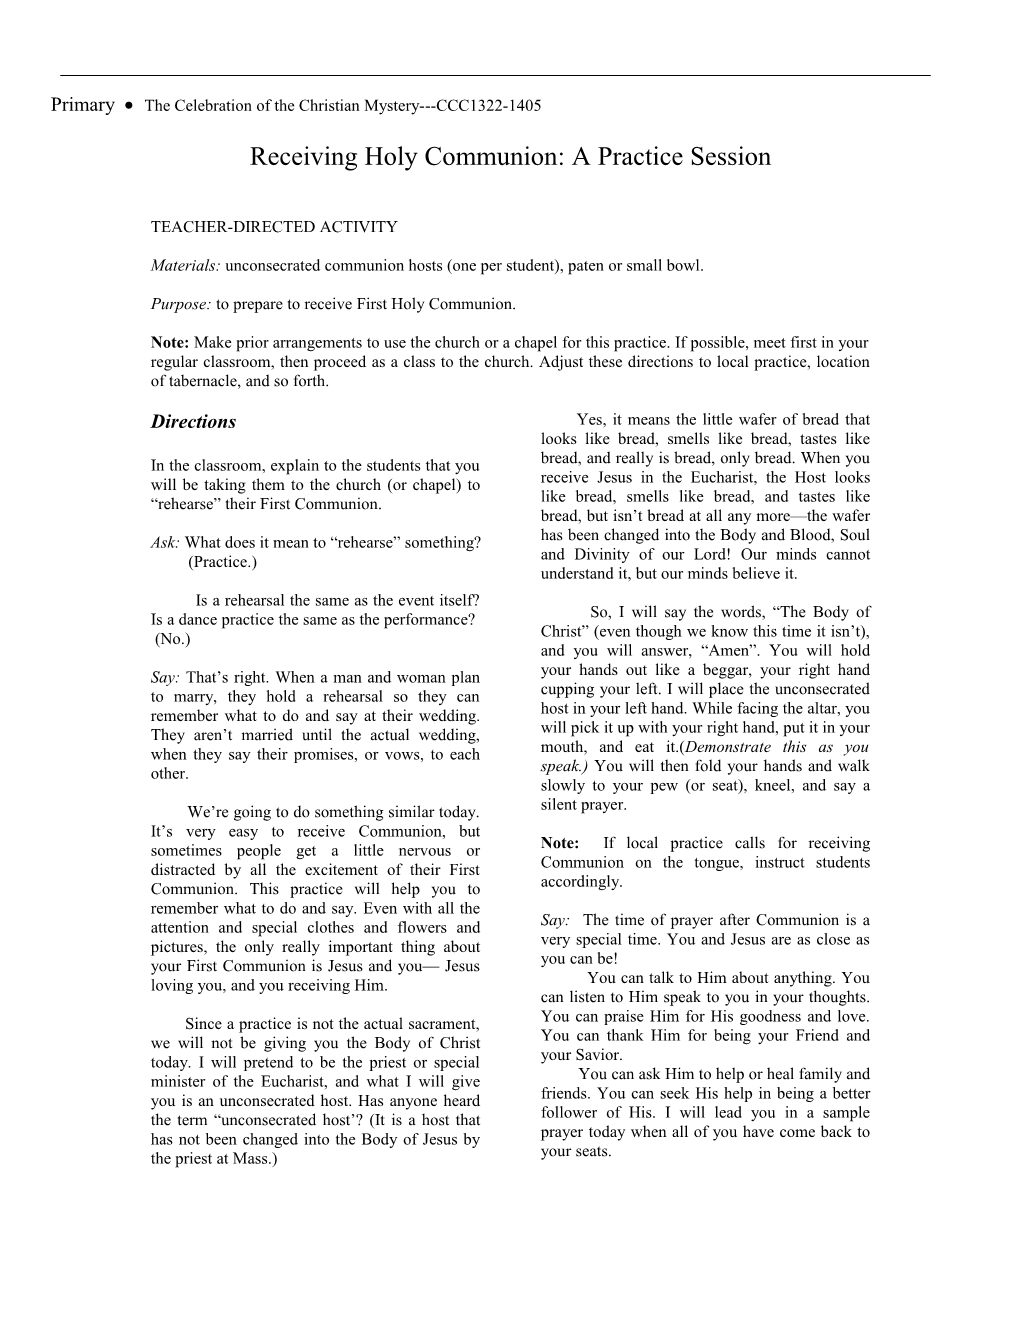 Receiving Holy Communion: a Practice Session